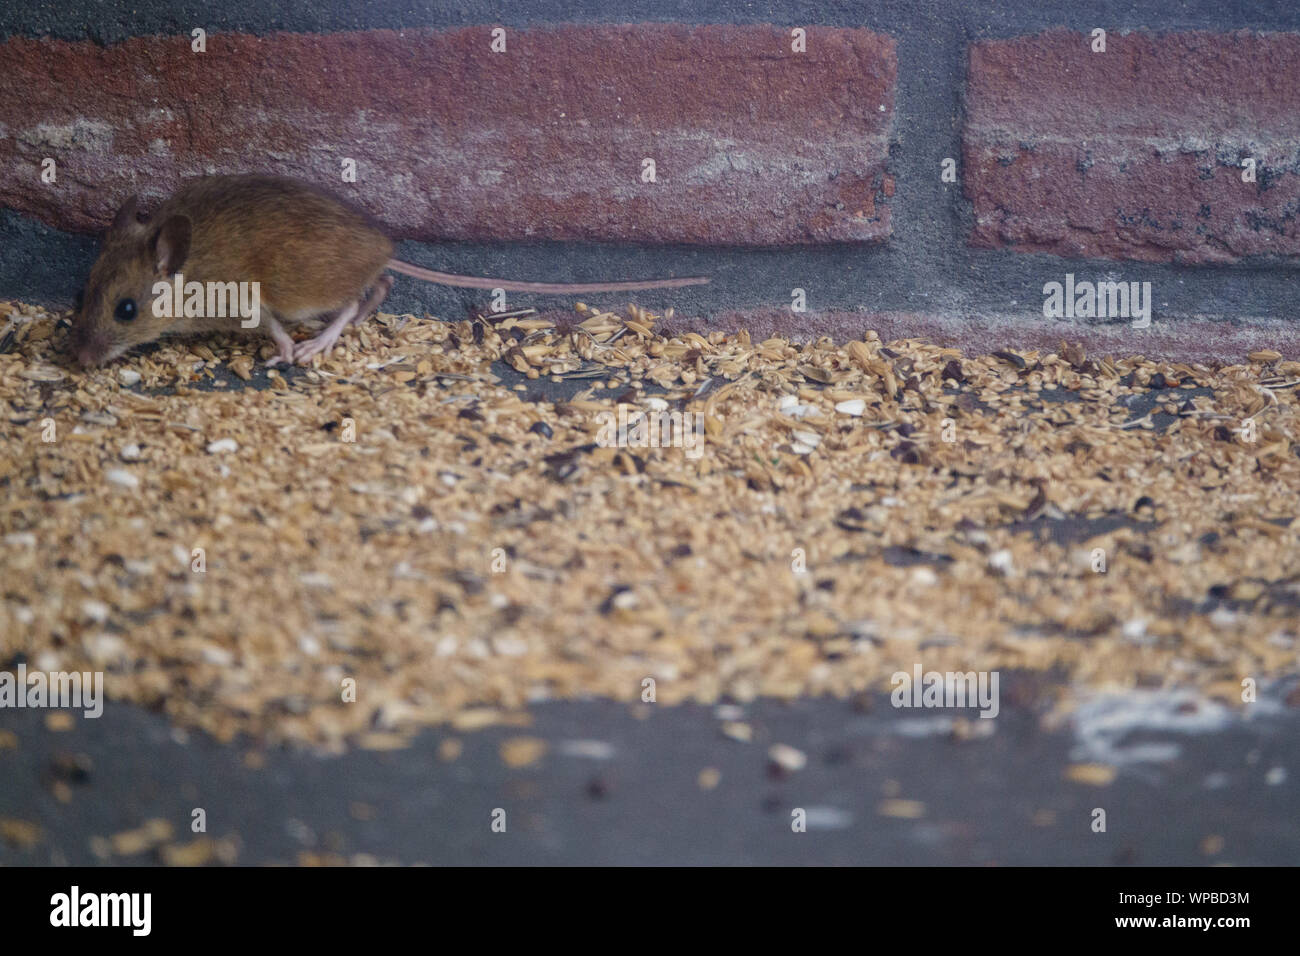 A mouse feasting on seeds spoiled by birds from the bird feeder Stock Photo